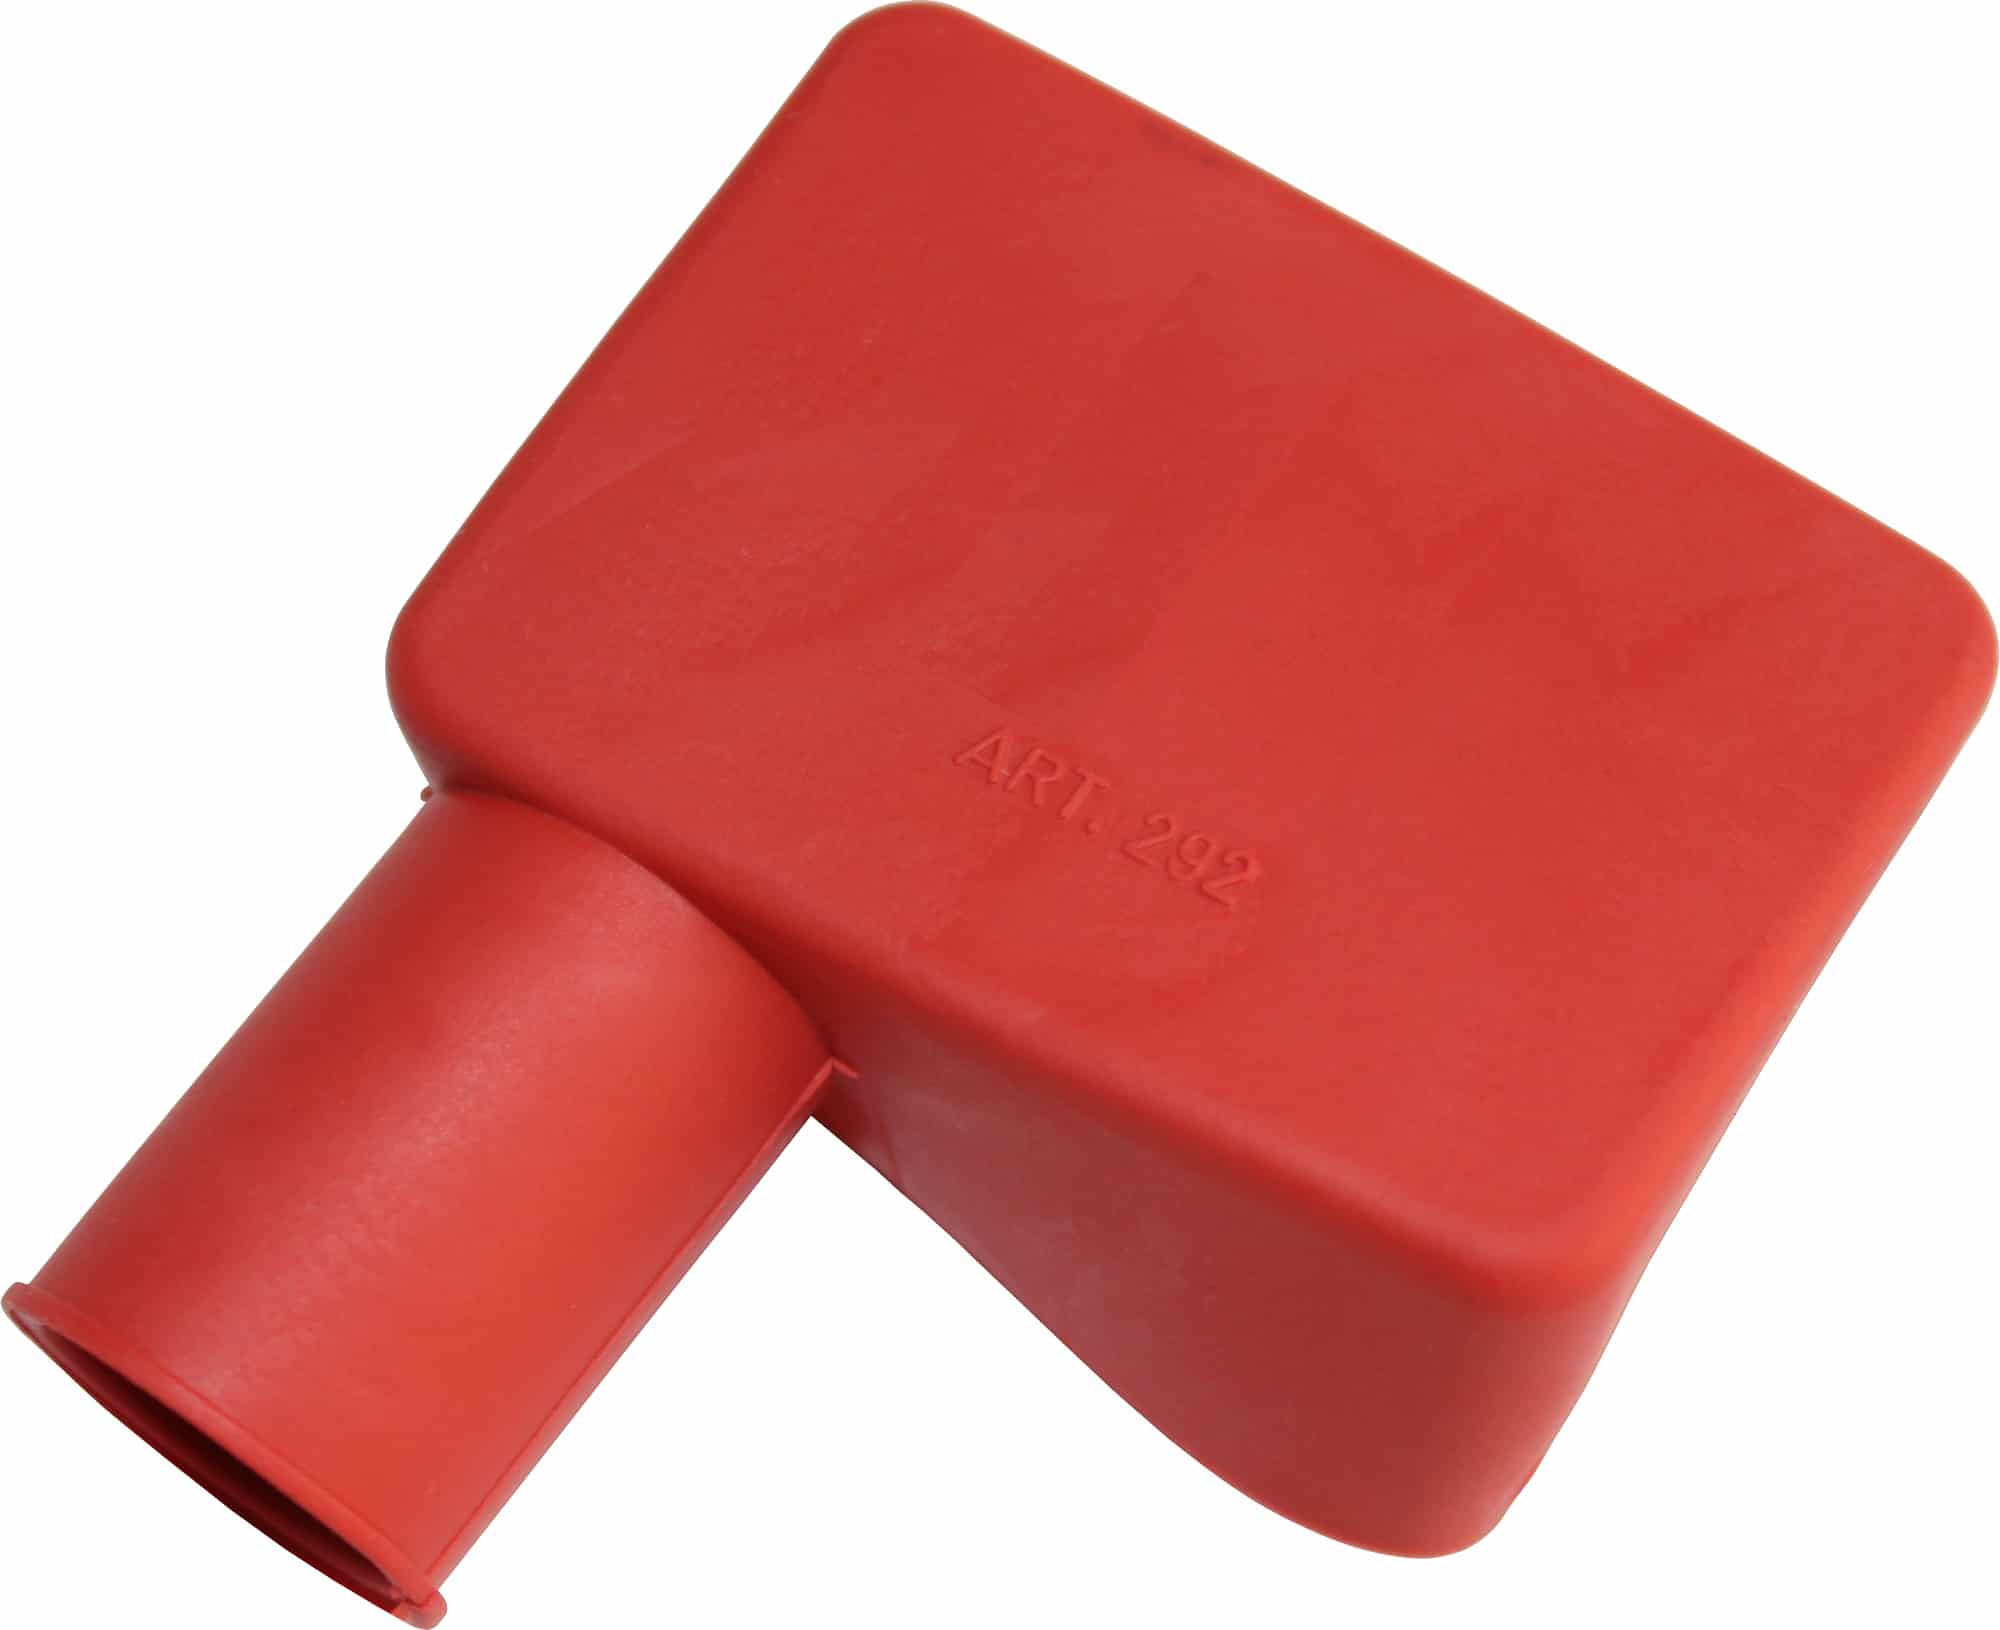 Cover coat hood protector for terminal pole battery shoes battery pole red car truck motorcycle scooter tractor camping Insulating cap Protective cap Dust cover 020292R RACO